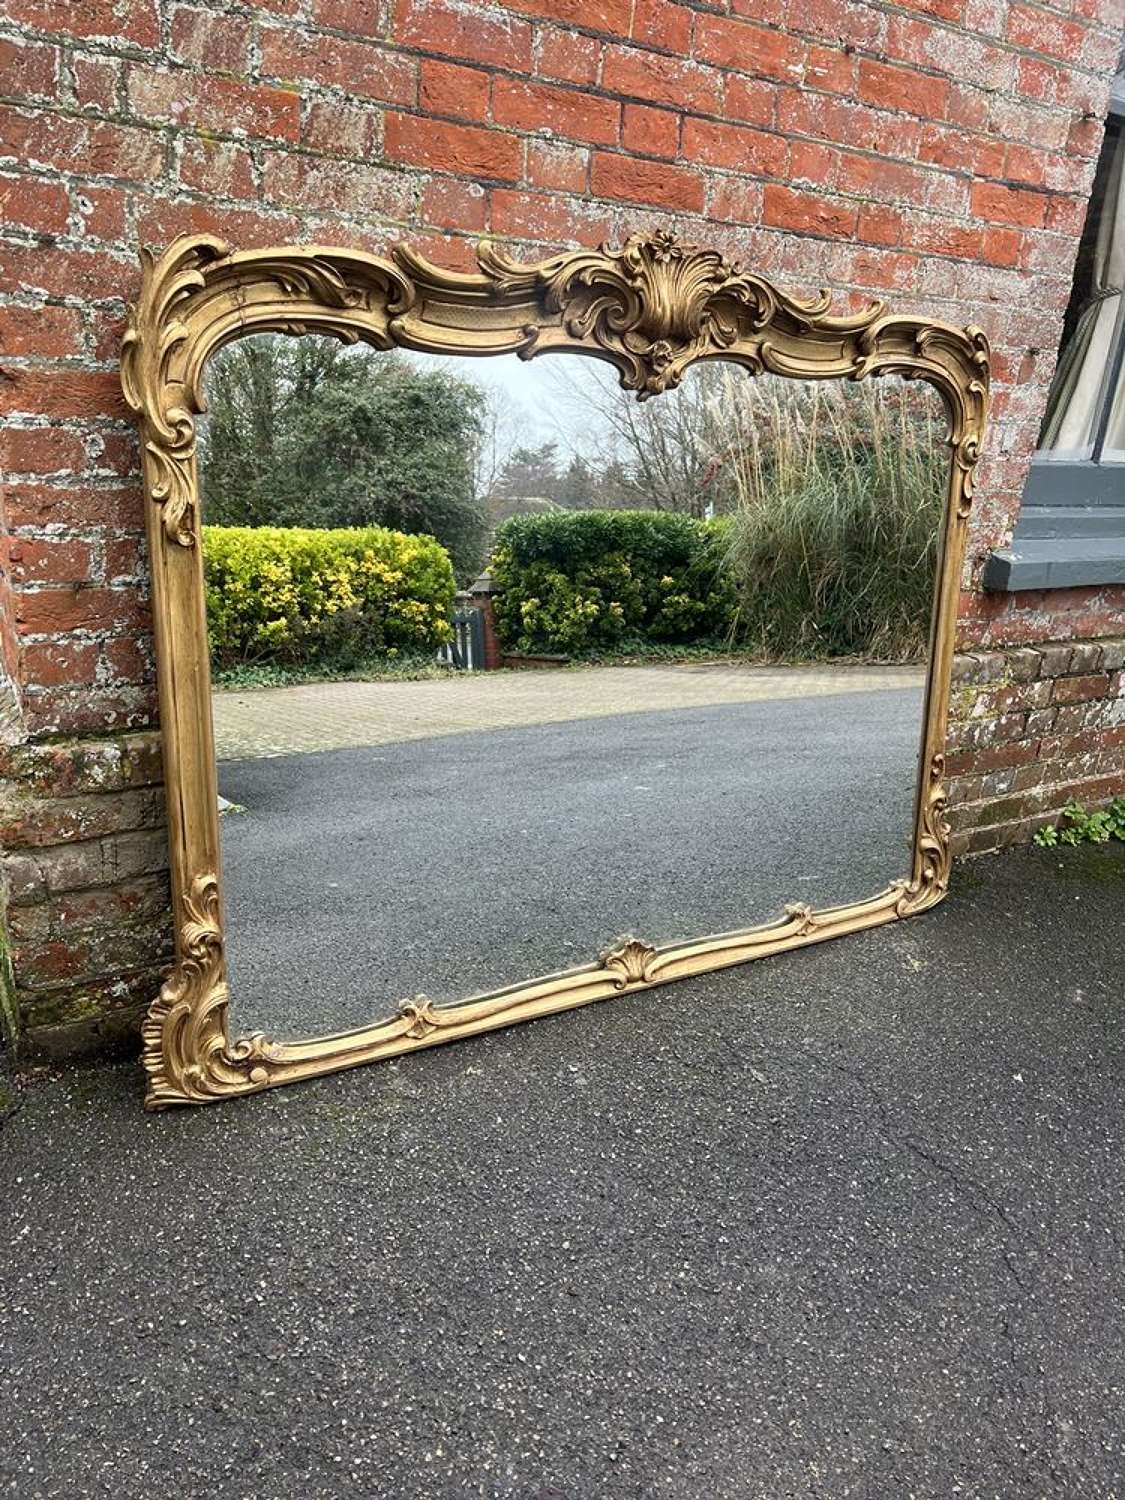 An Exceptional large Antique English 19th C ornate framed Gilt Mirror.